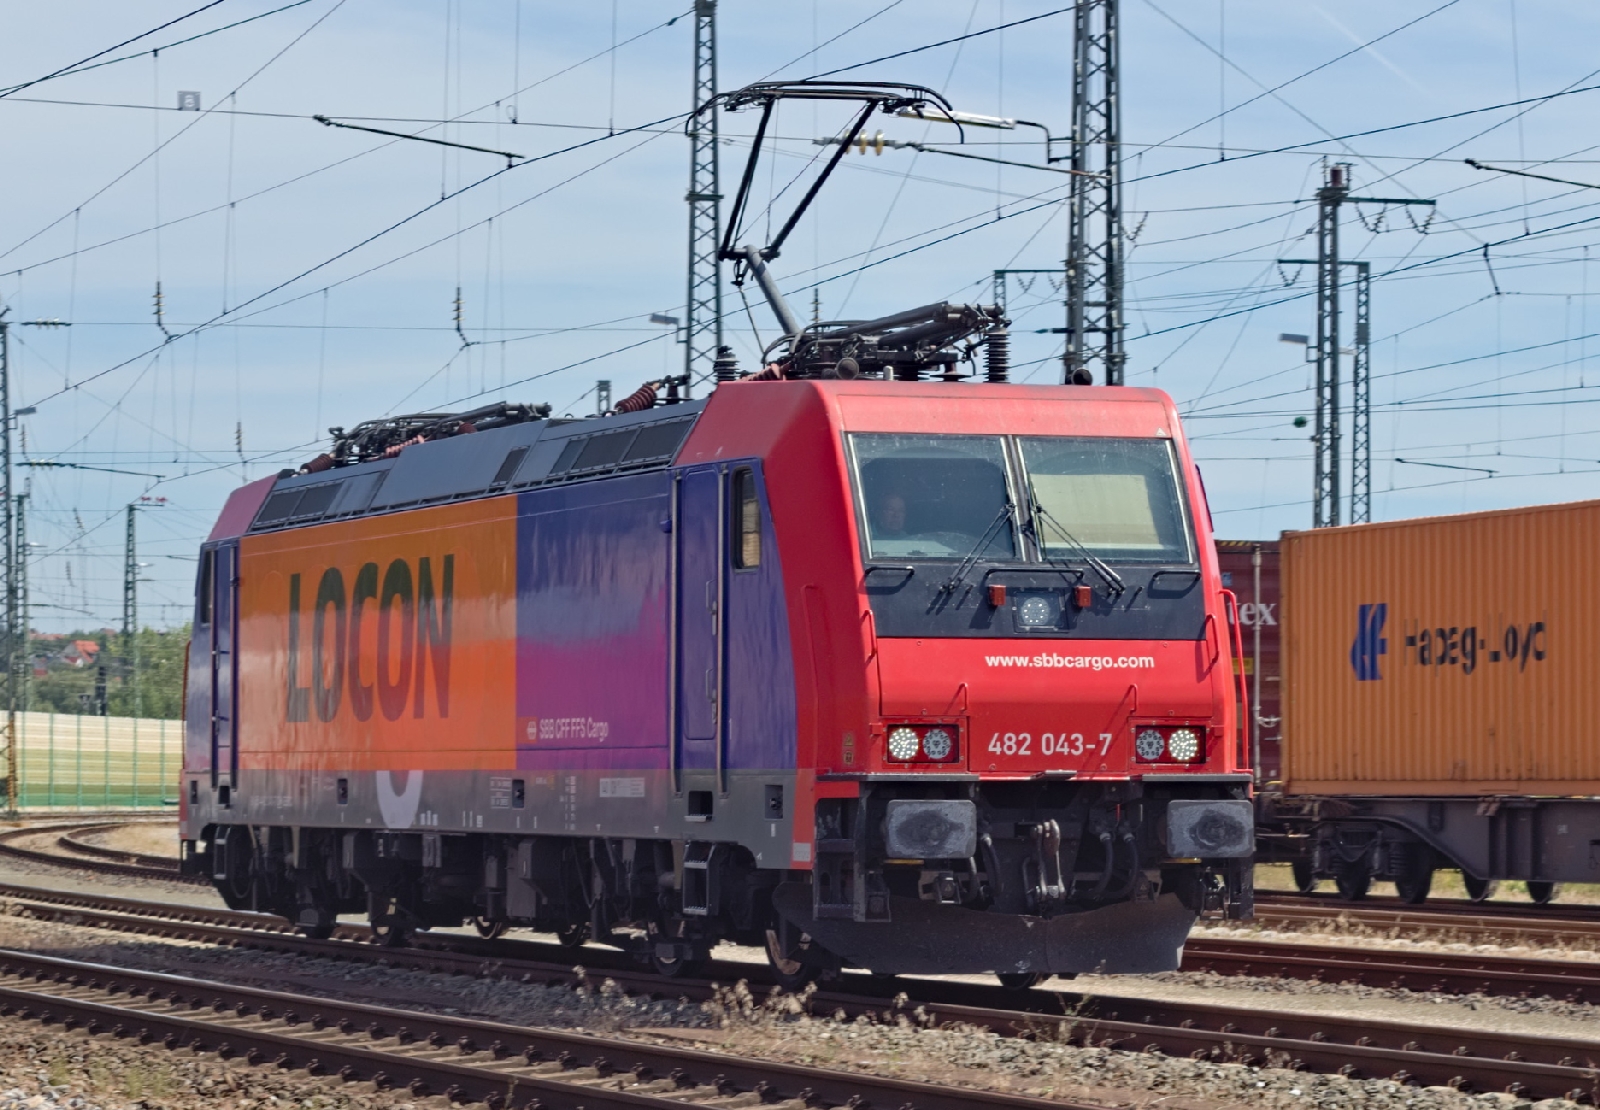 F140AC2 as SBB Re 482 043 in August 2019 in Ansbach